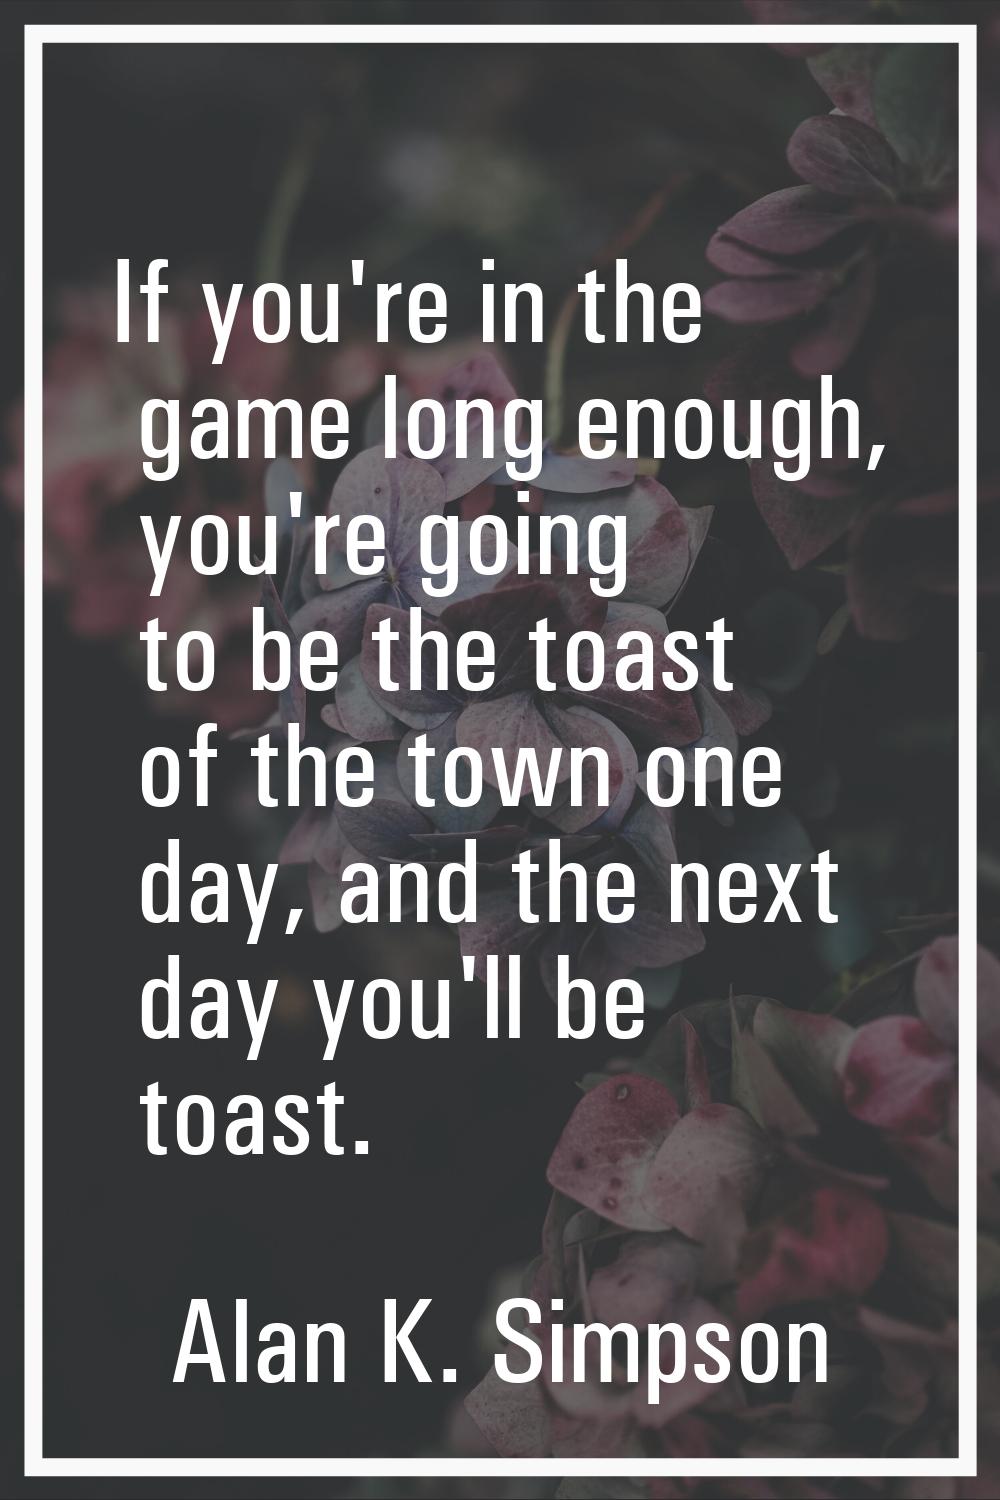 If you're in the game long enough, you're going to be the toast of the town one day, and the next d